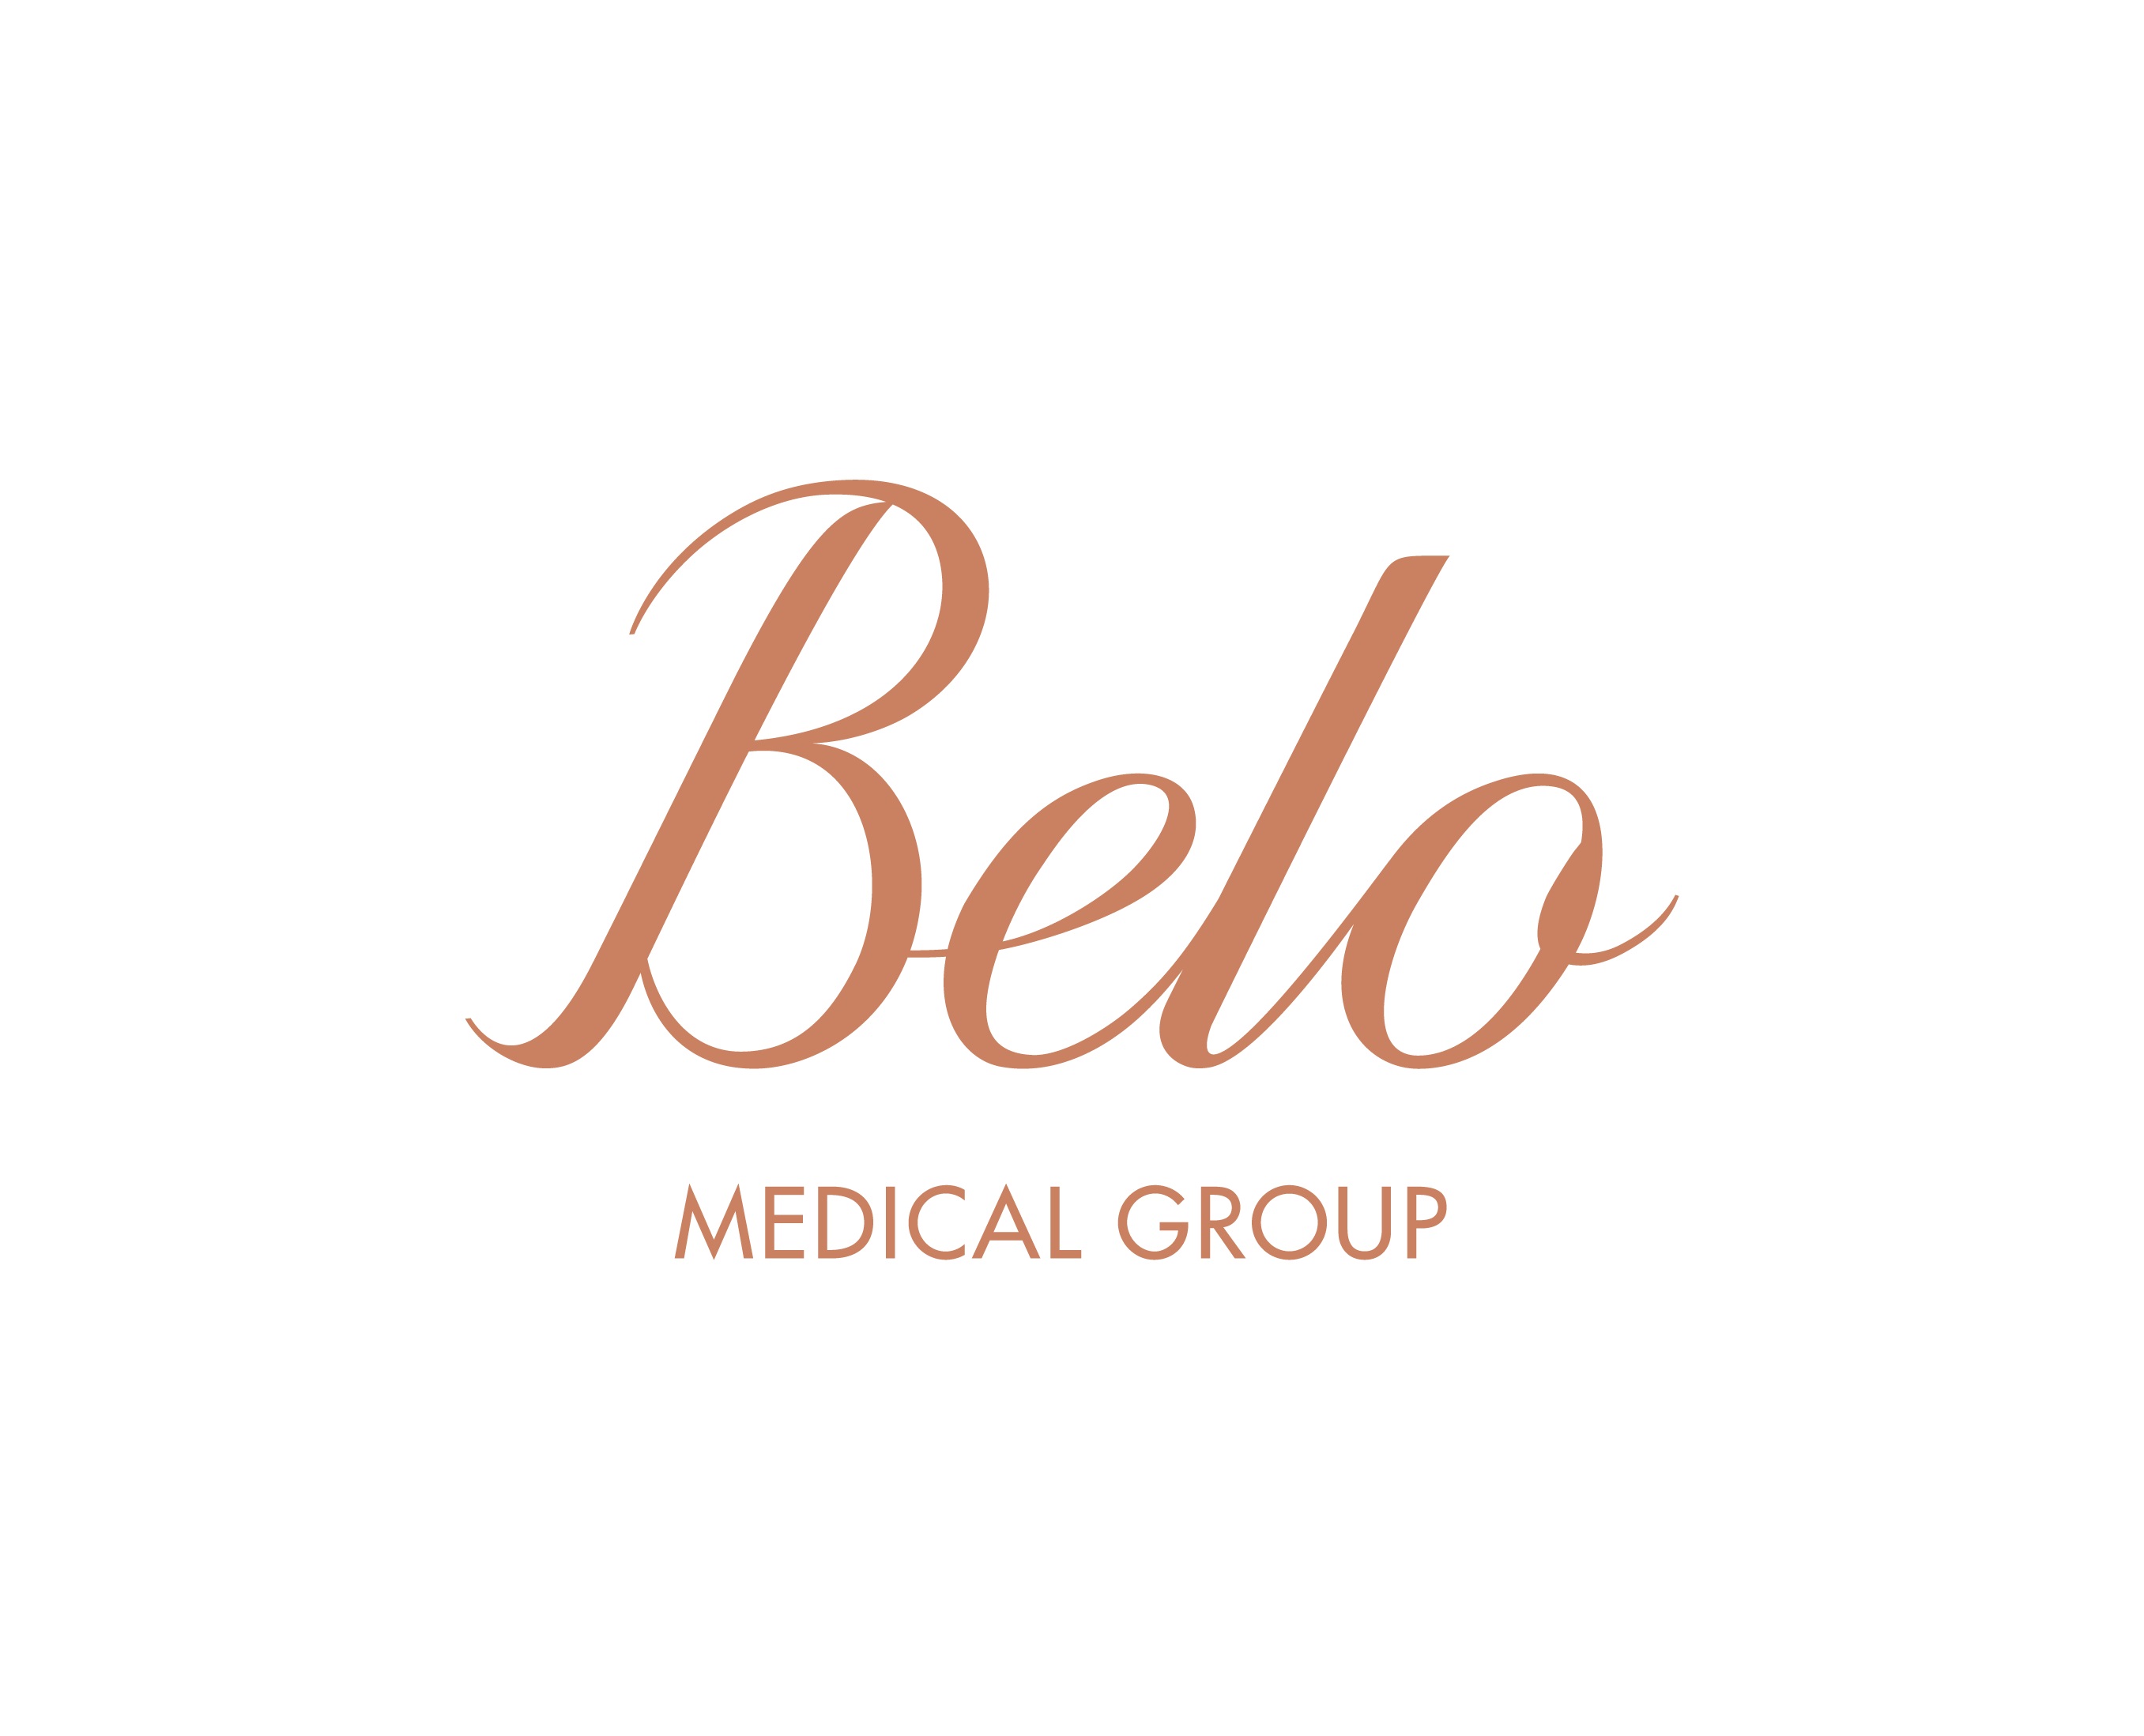 Belo Medical Group Price List 2021 How do you Price a Switches?